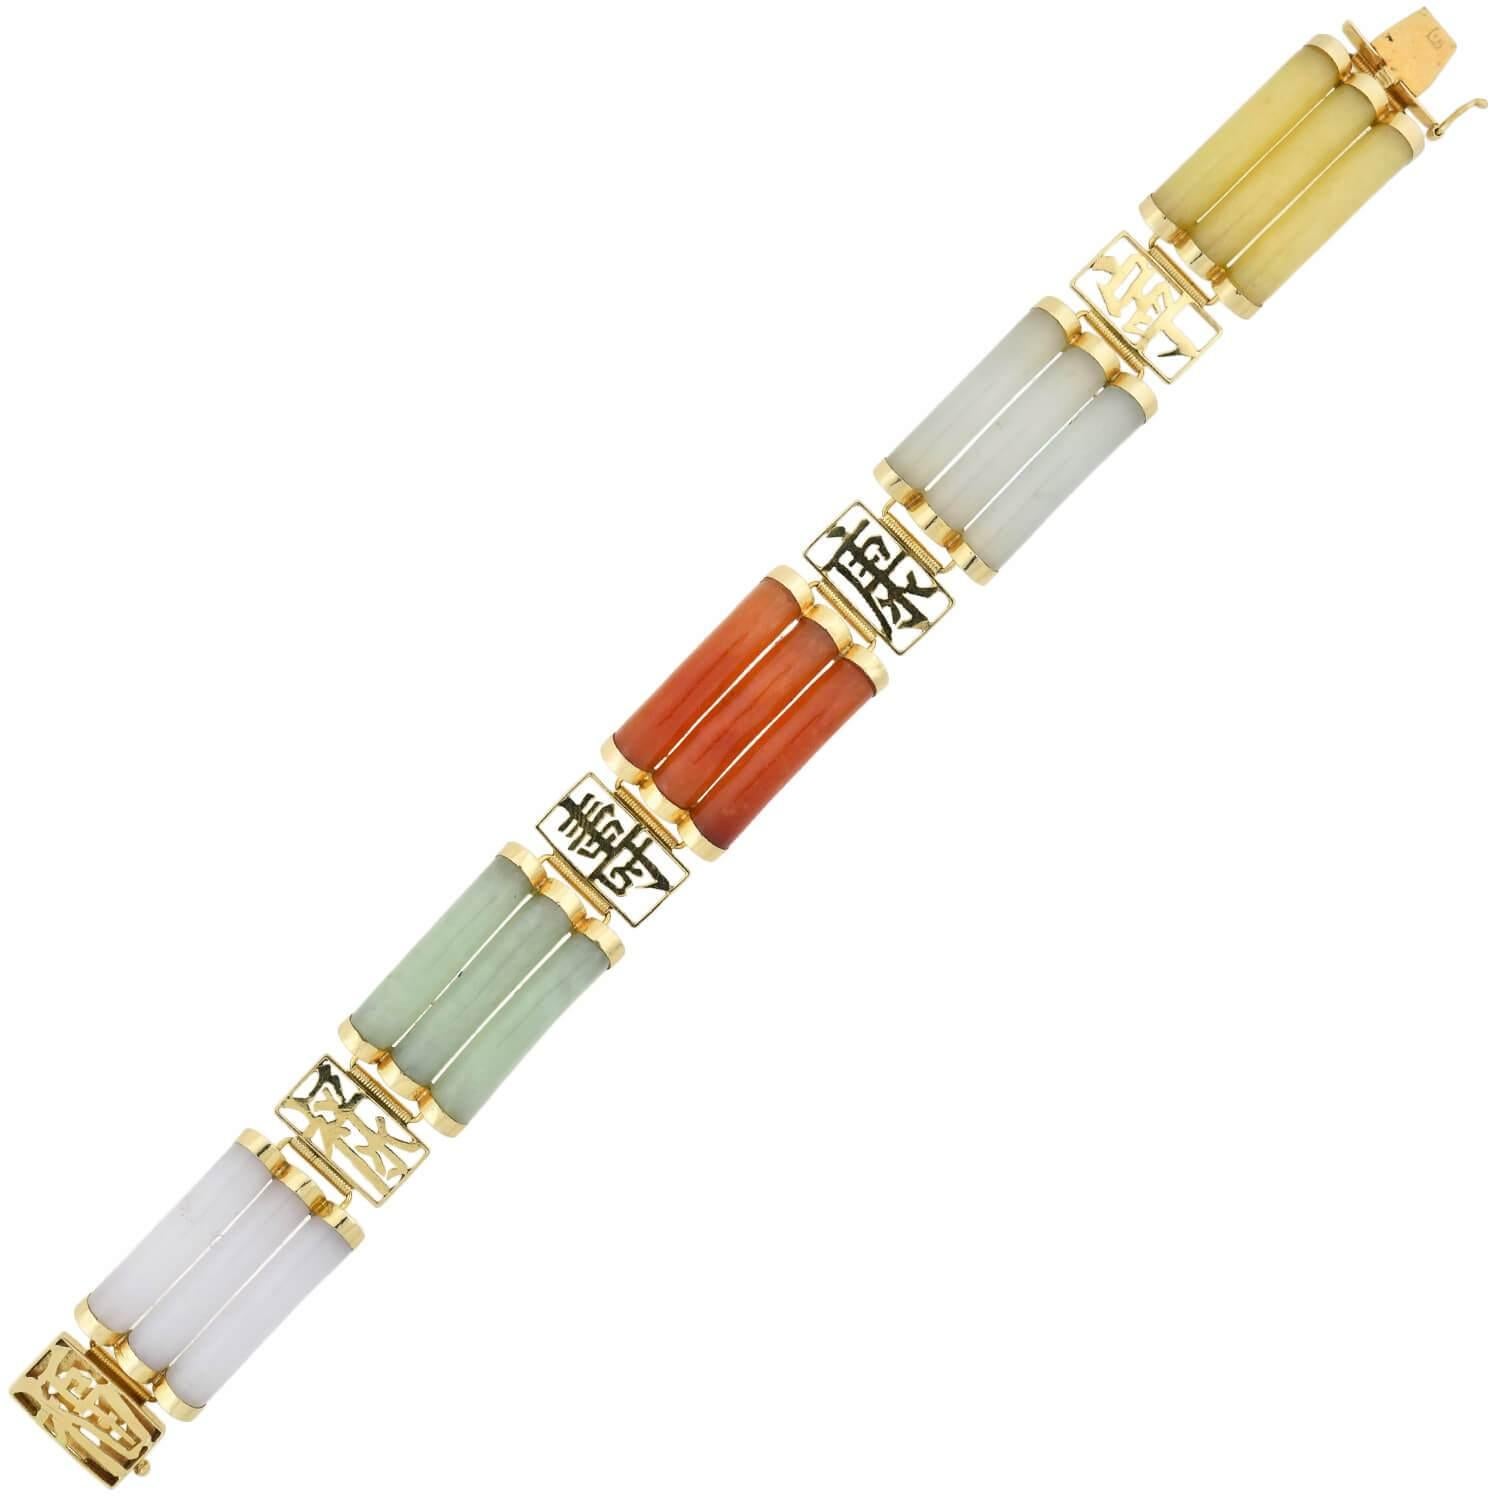 A fun and unique jade bracelet from the 1960s era! Crafted in 14kt yellow gold, this bold piece features an alternating design of multi-colored jade and open Chinese characters. The colorful jade links are comprised of three curved bars, each ending